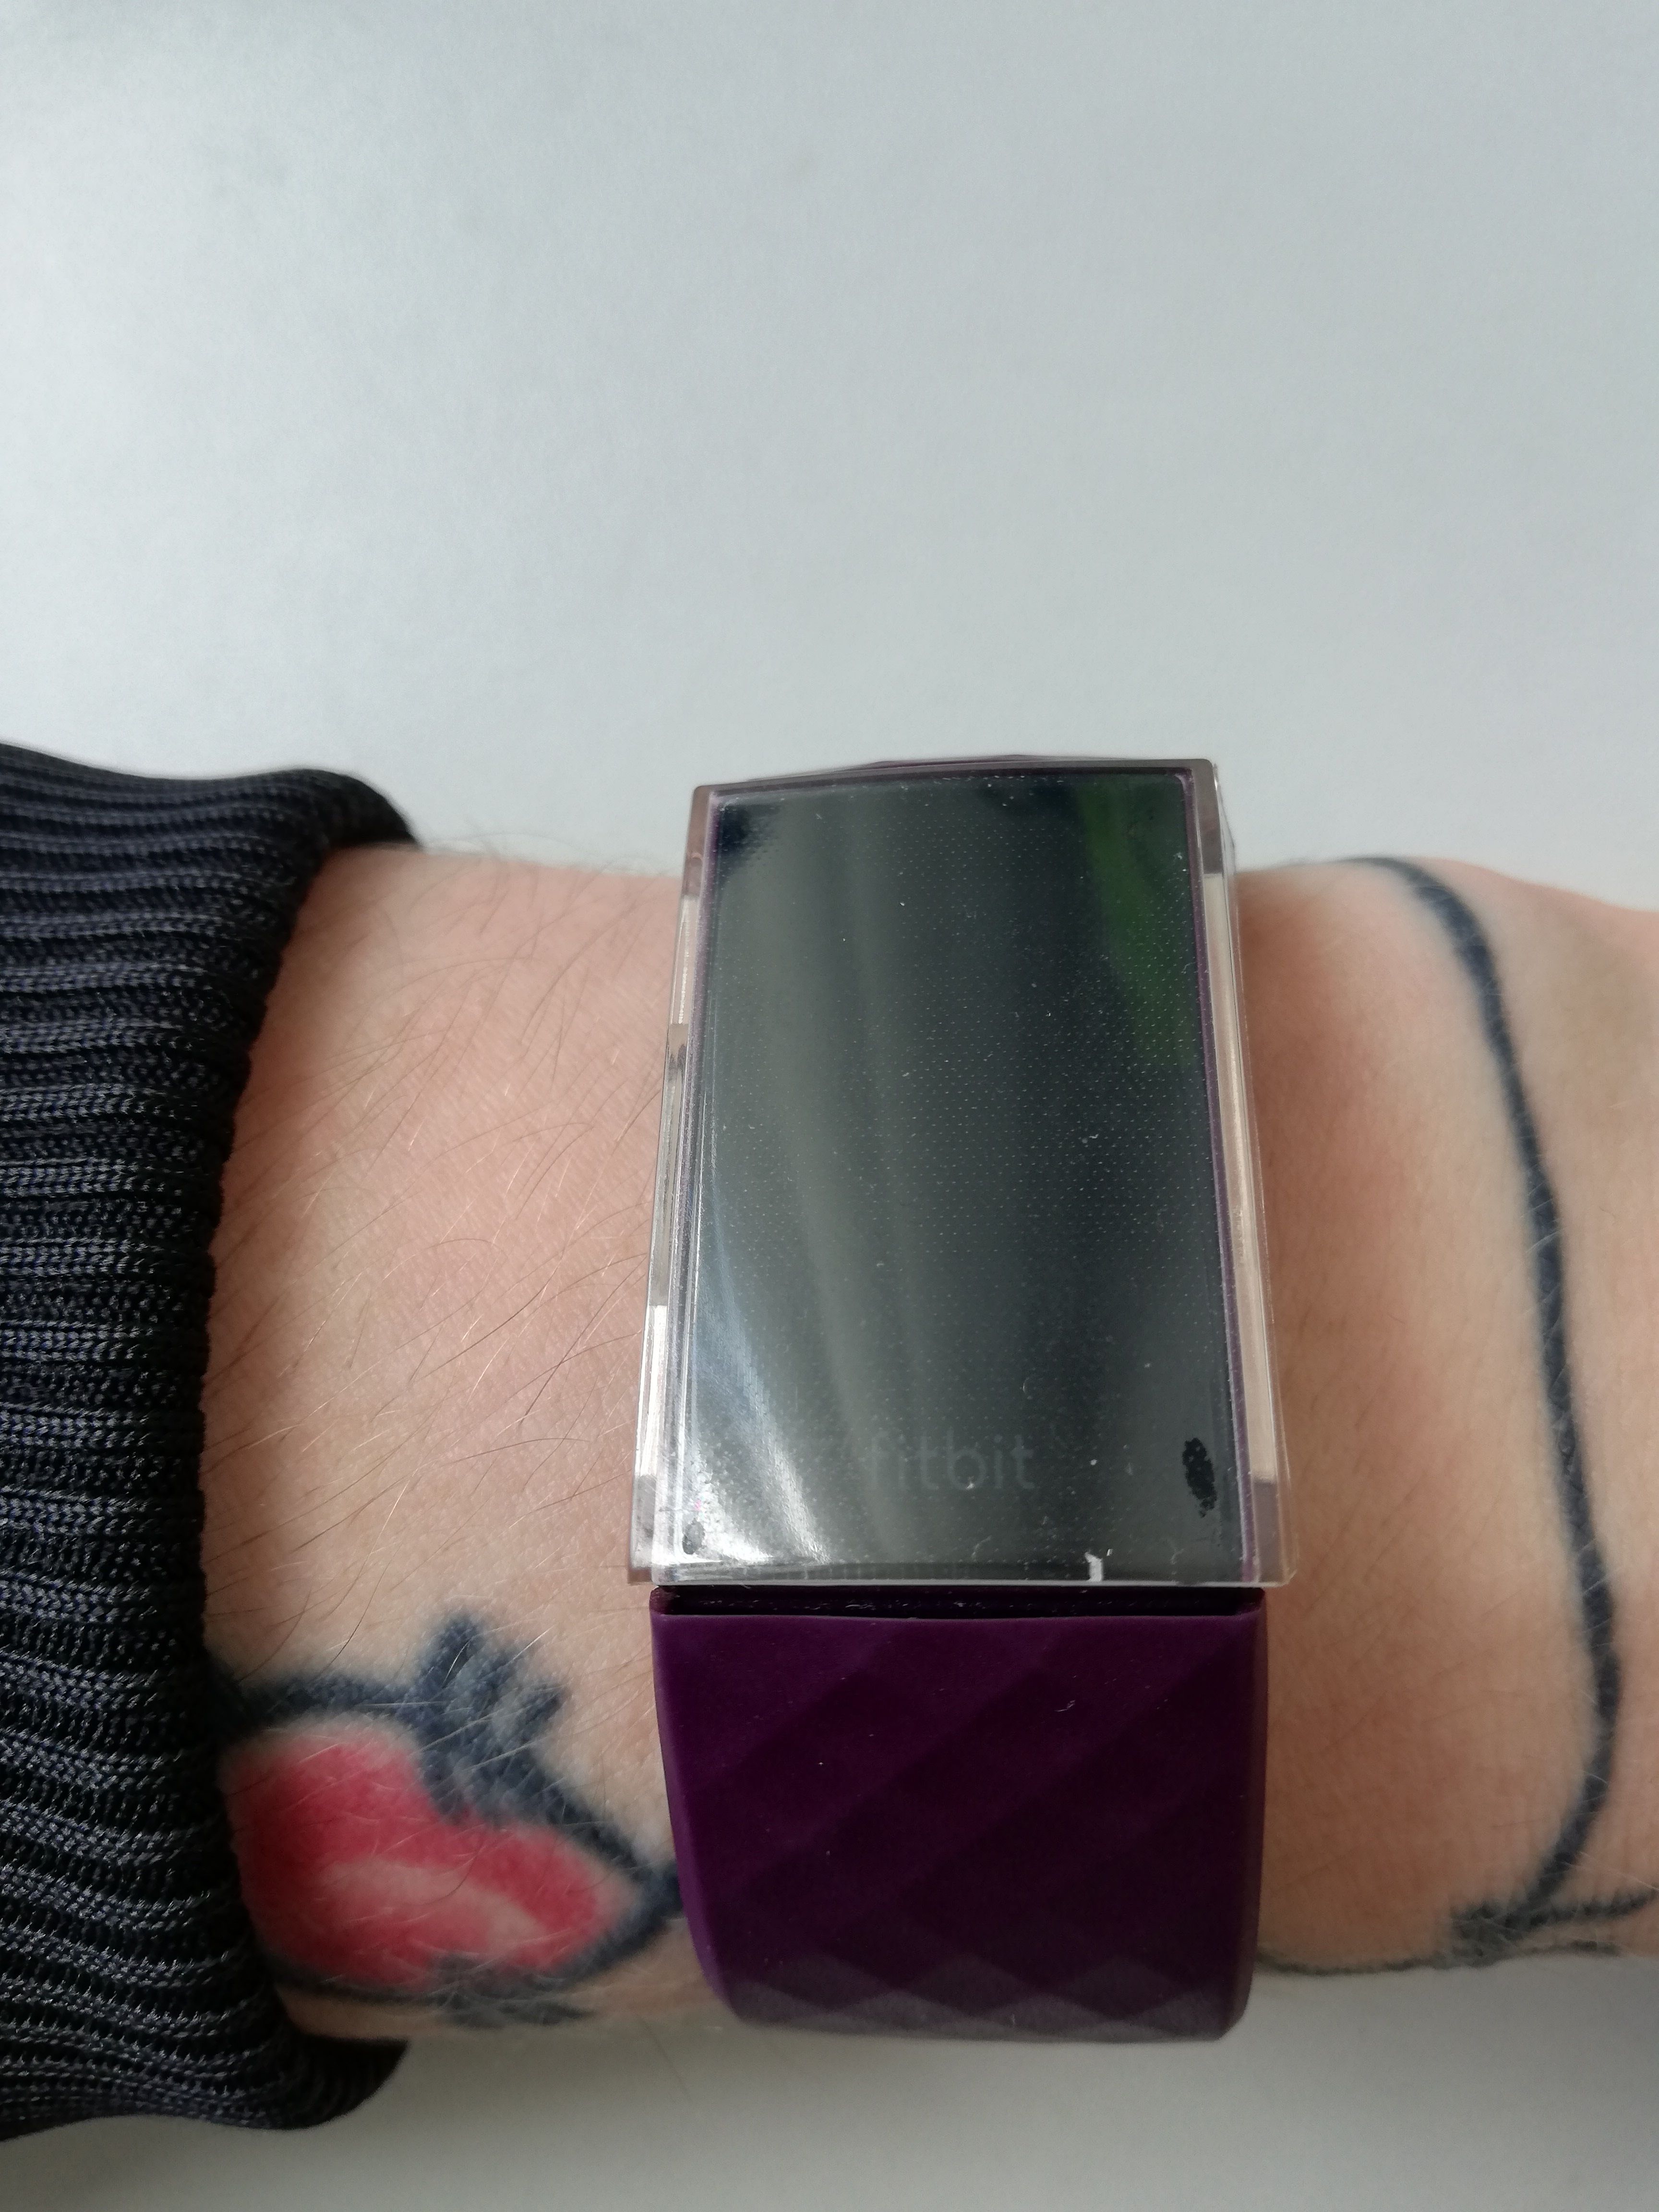 fitbit charge 4 strap gap